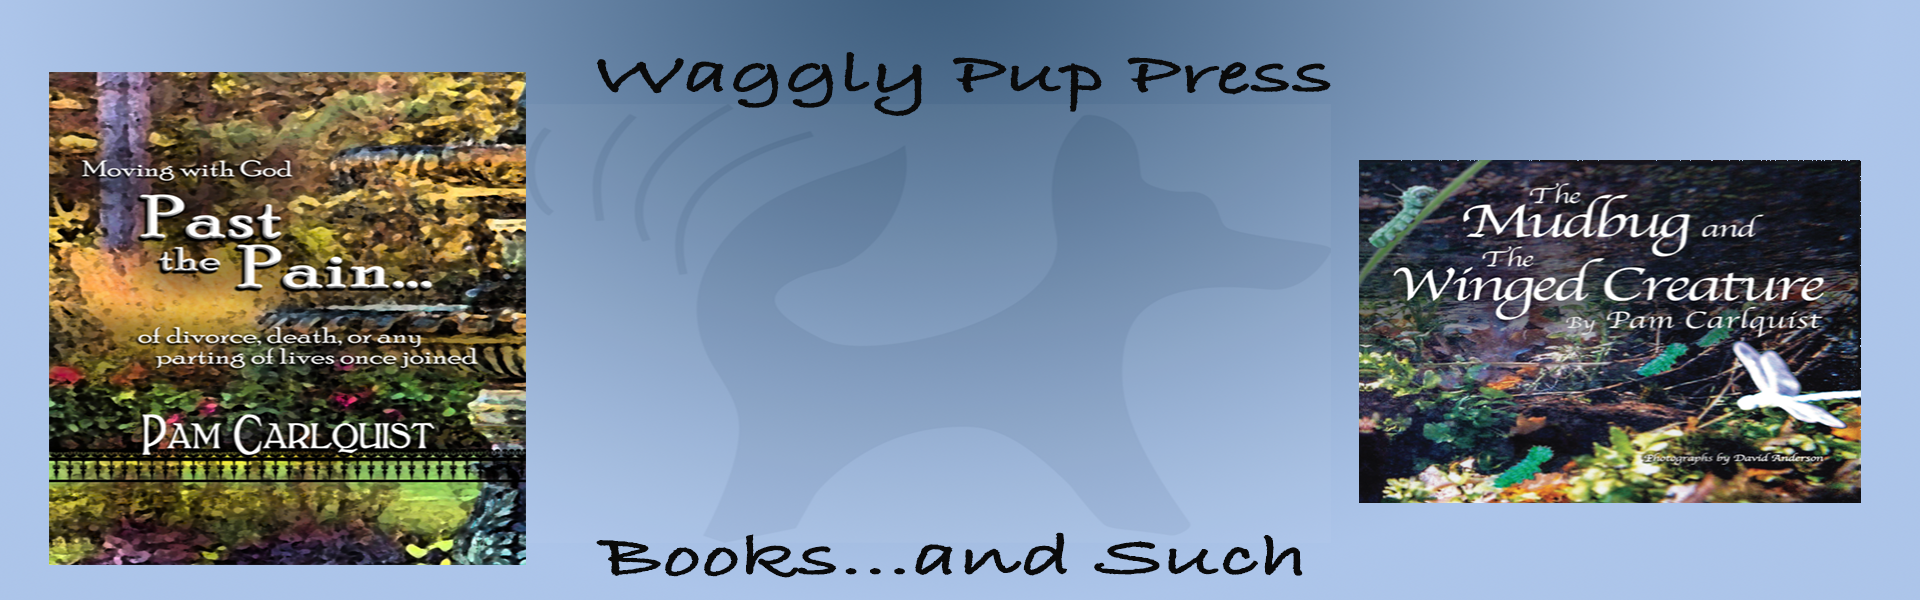 Waggly Pup Press Books and Such